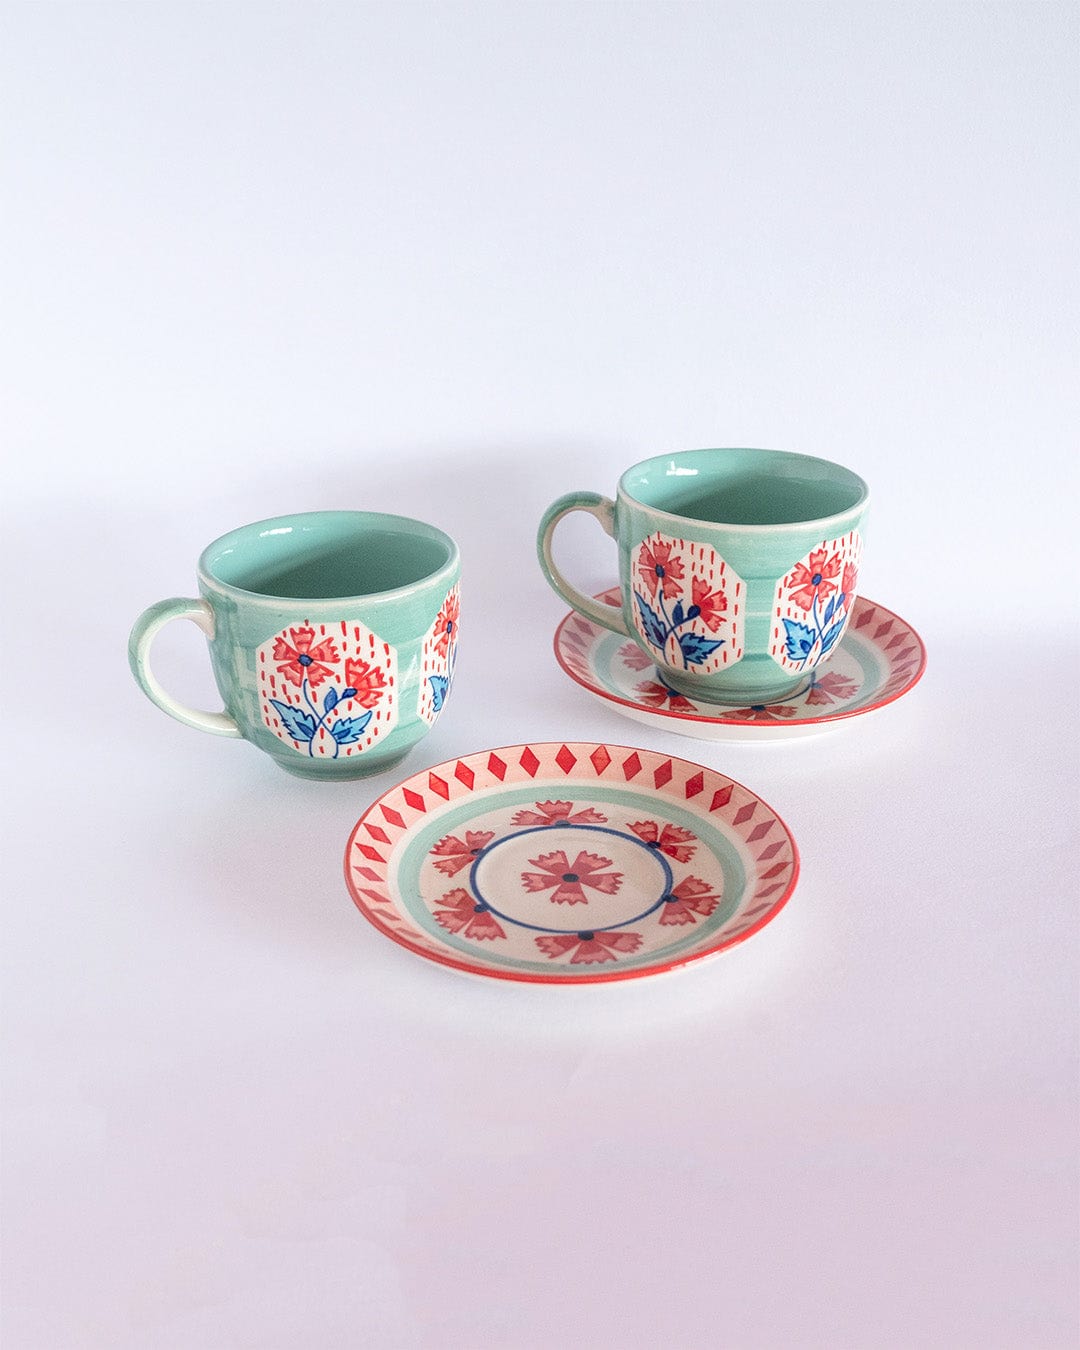 Poppies & Play Teacup and Saucer - Set of 2